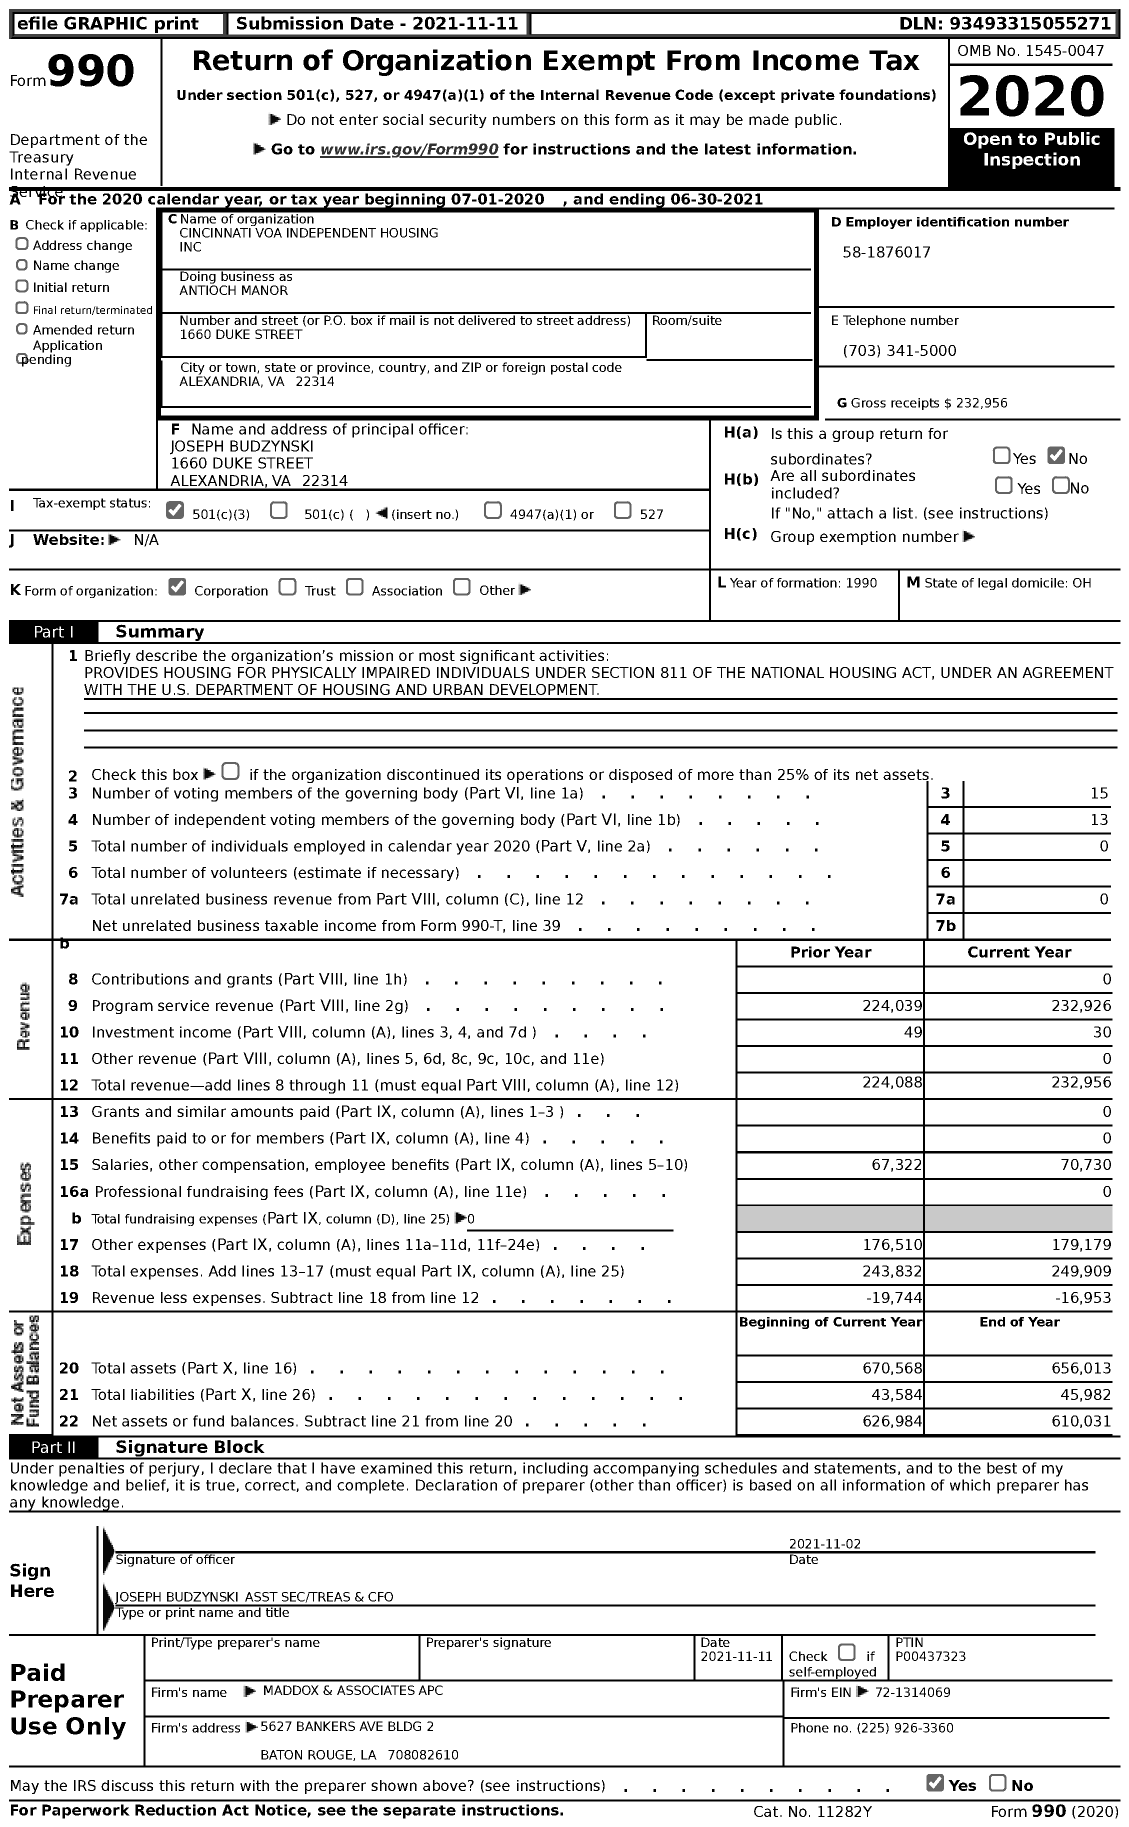 Image of first page of 2020 Form 990 for Volunteers of America - Cincinnati VOA Independent Housing